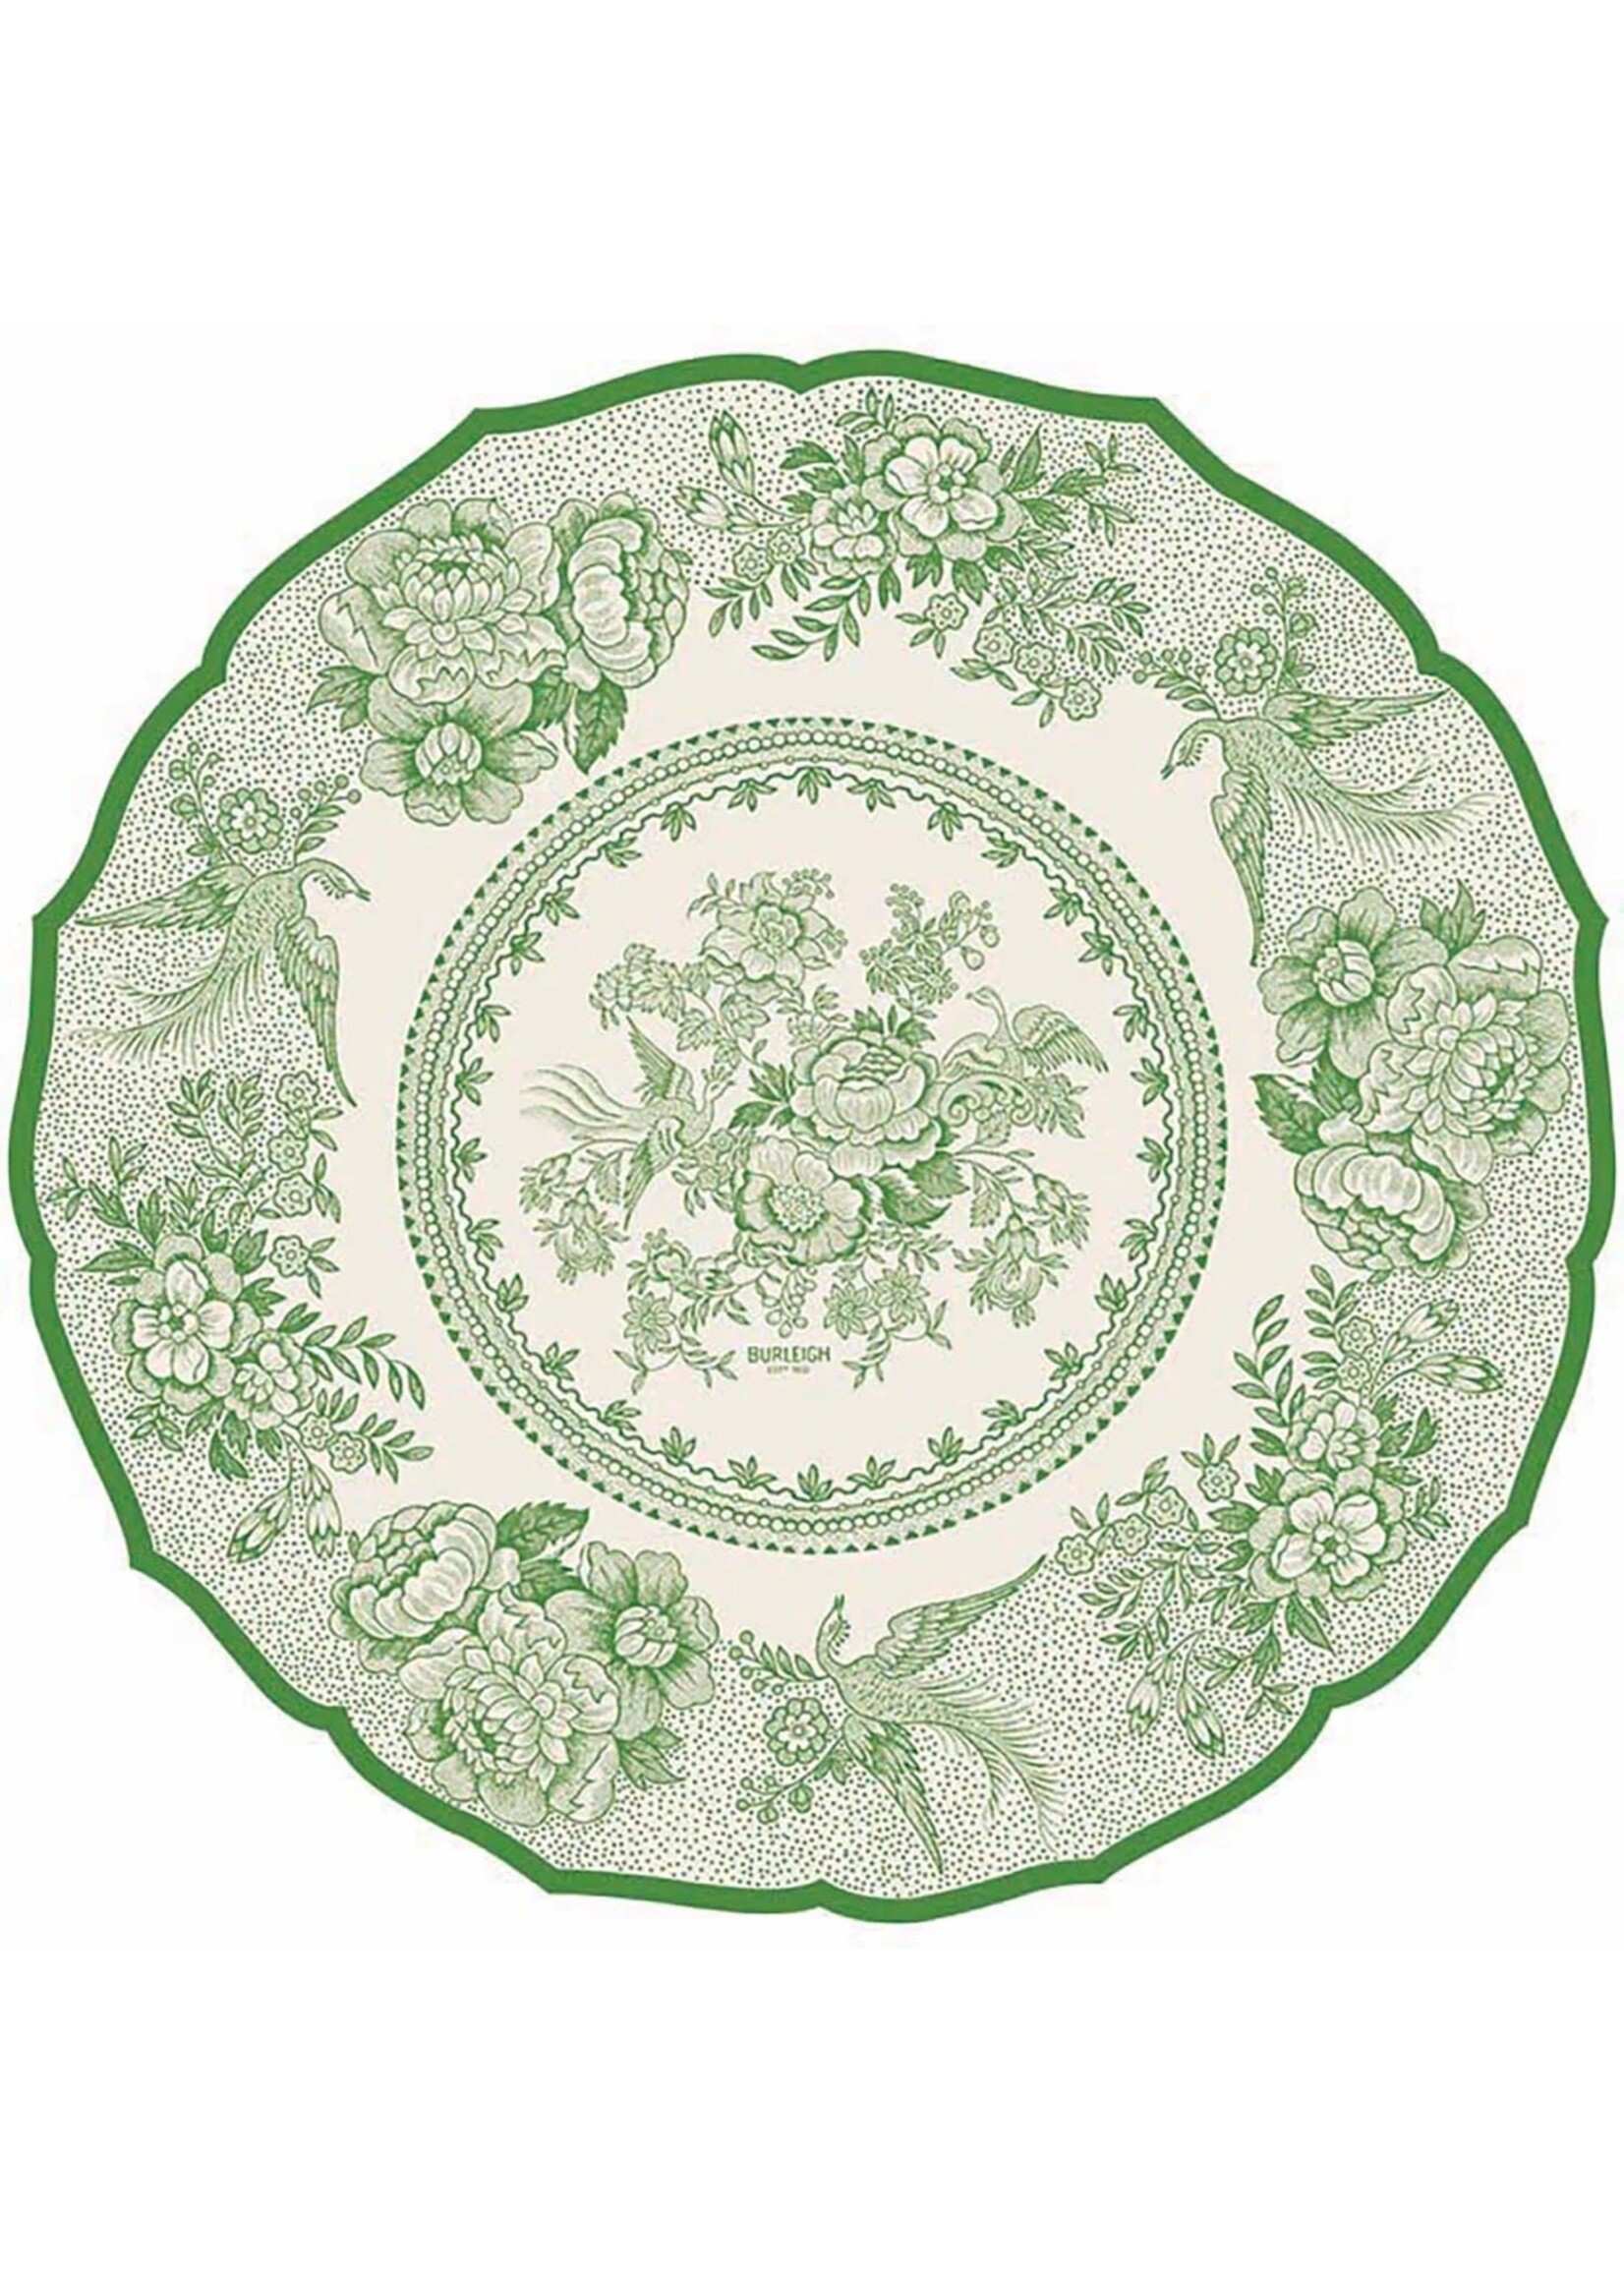 Hester & Cook Paper Placemats - Asiatic Pheasants Green (12 sheets)